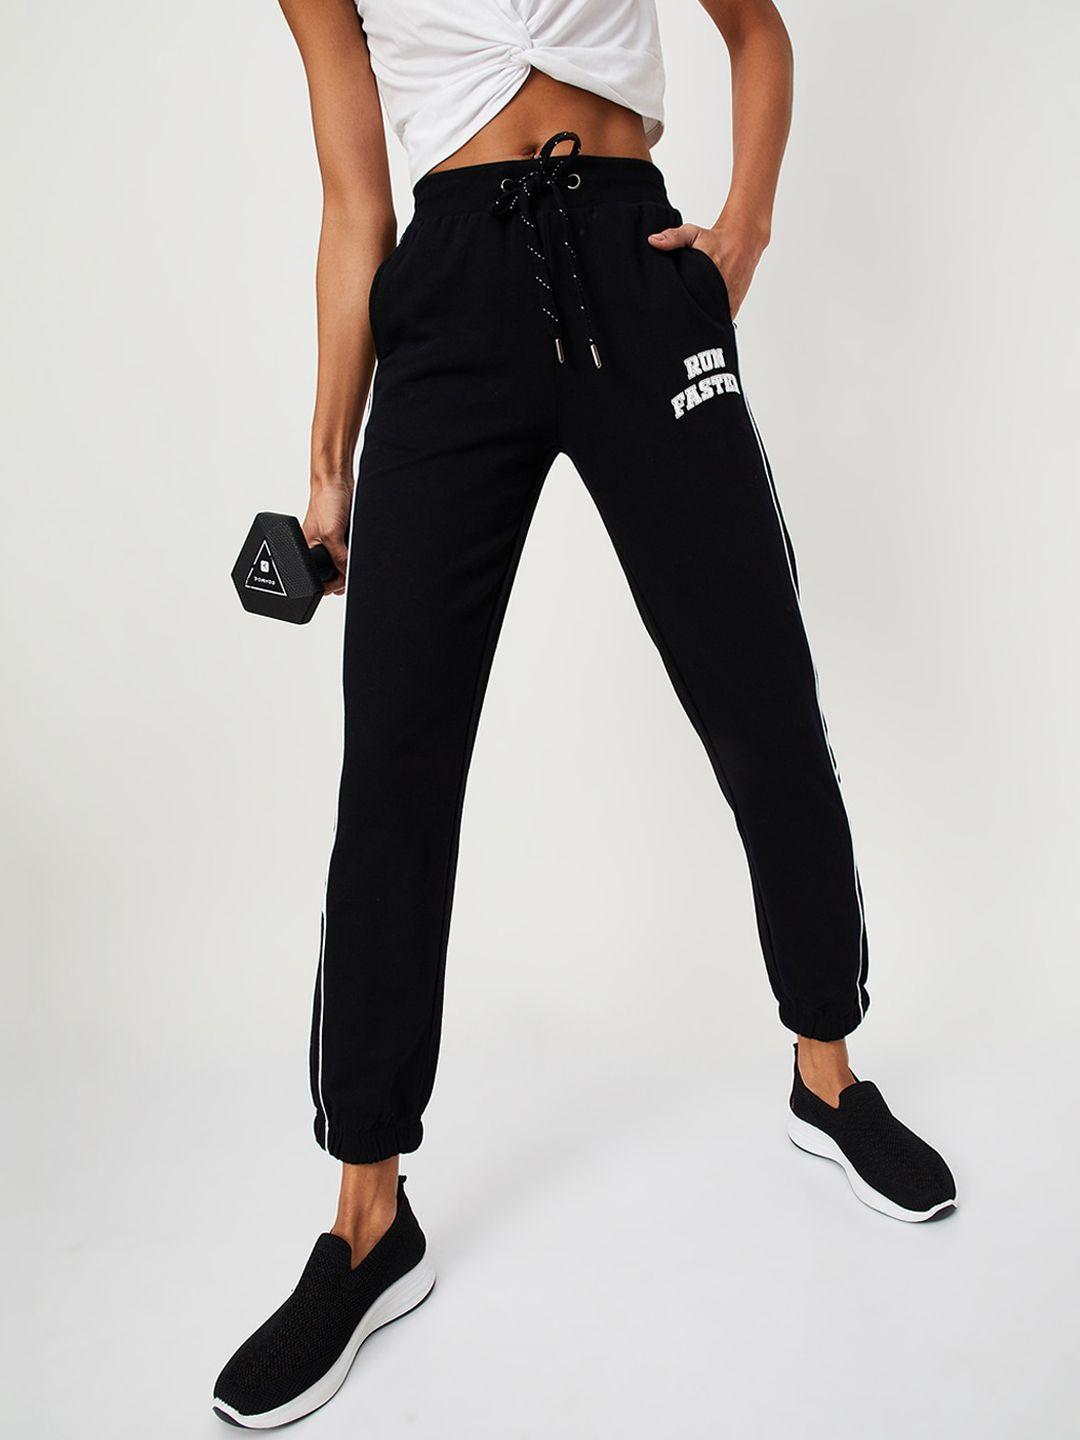 max-women-typography-printed-mid-rise-joggers